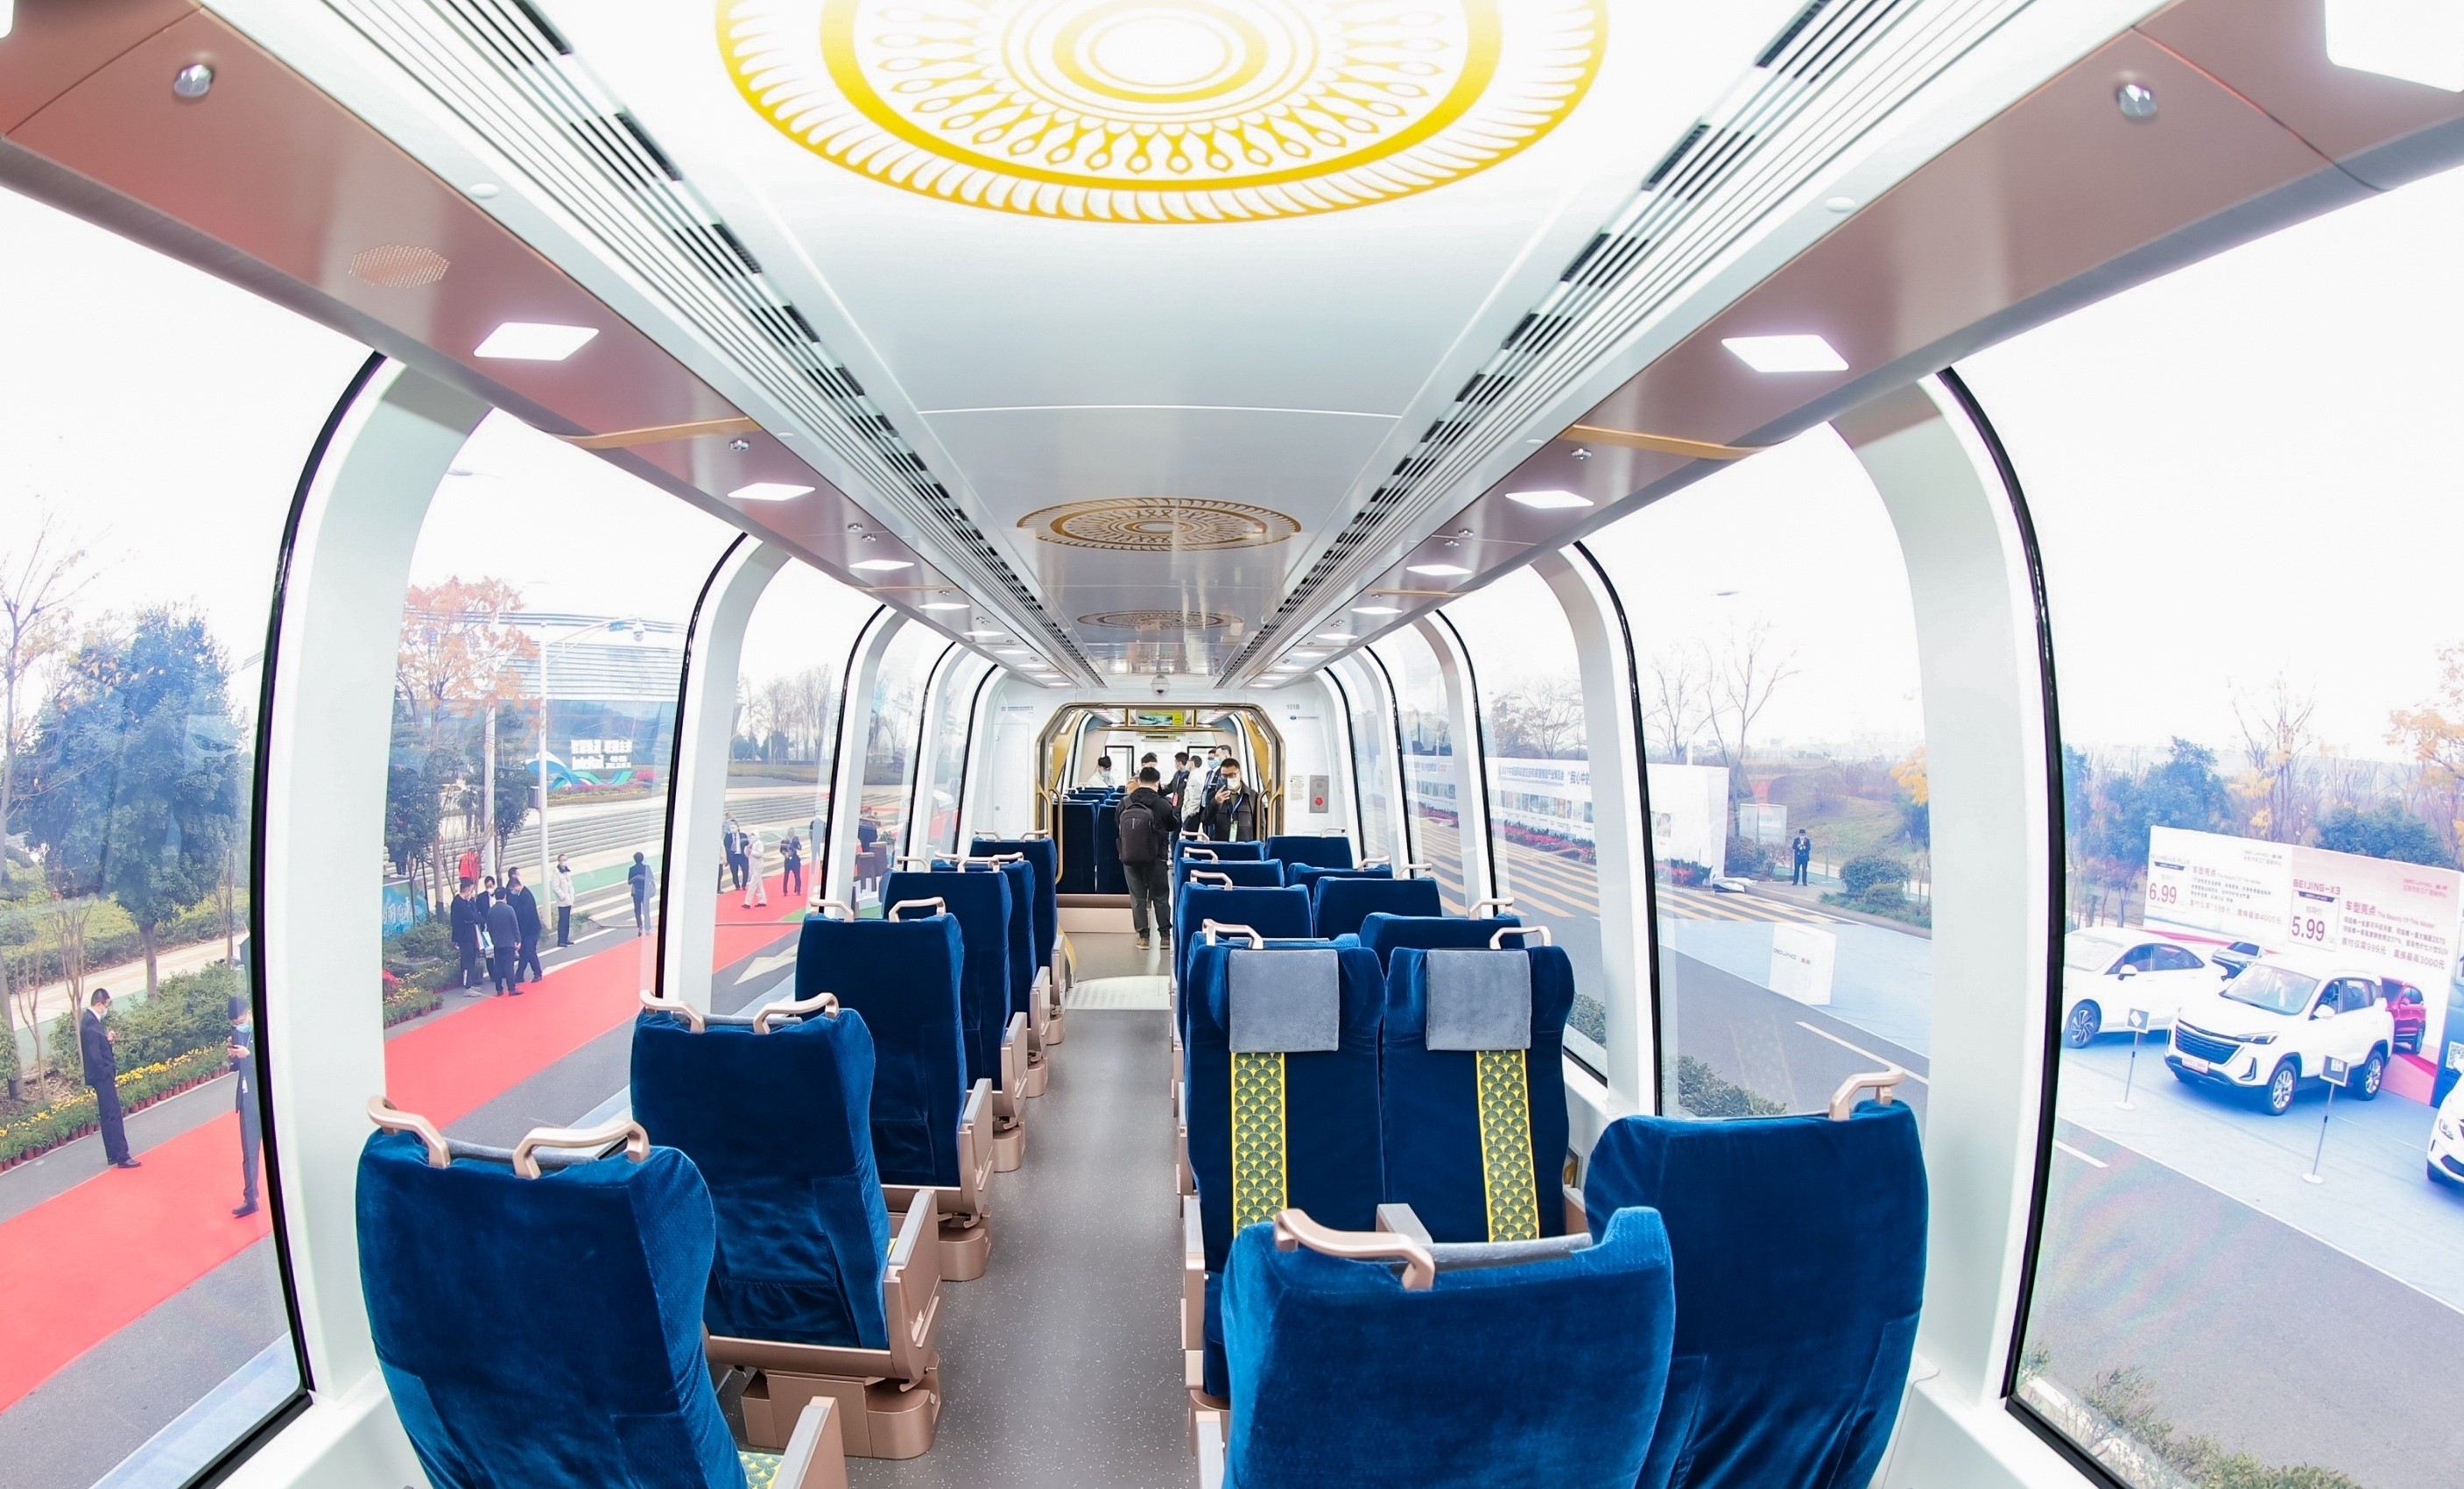 The seats in the CRRC's panoramic tourist train